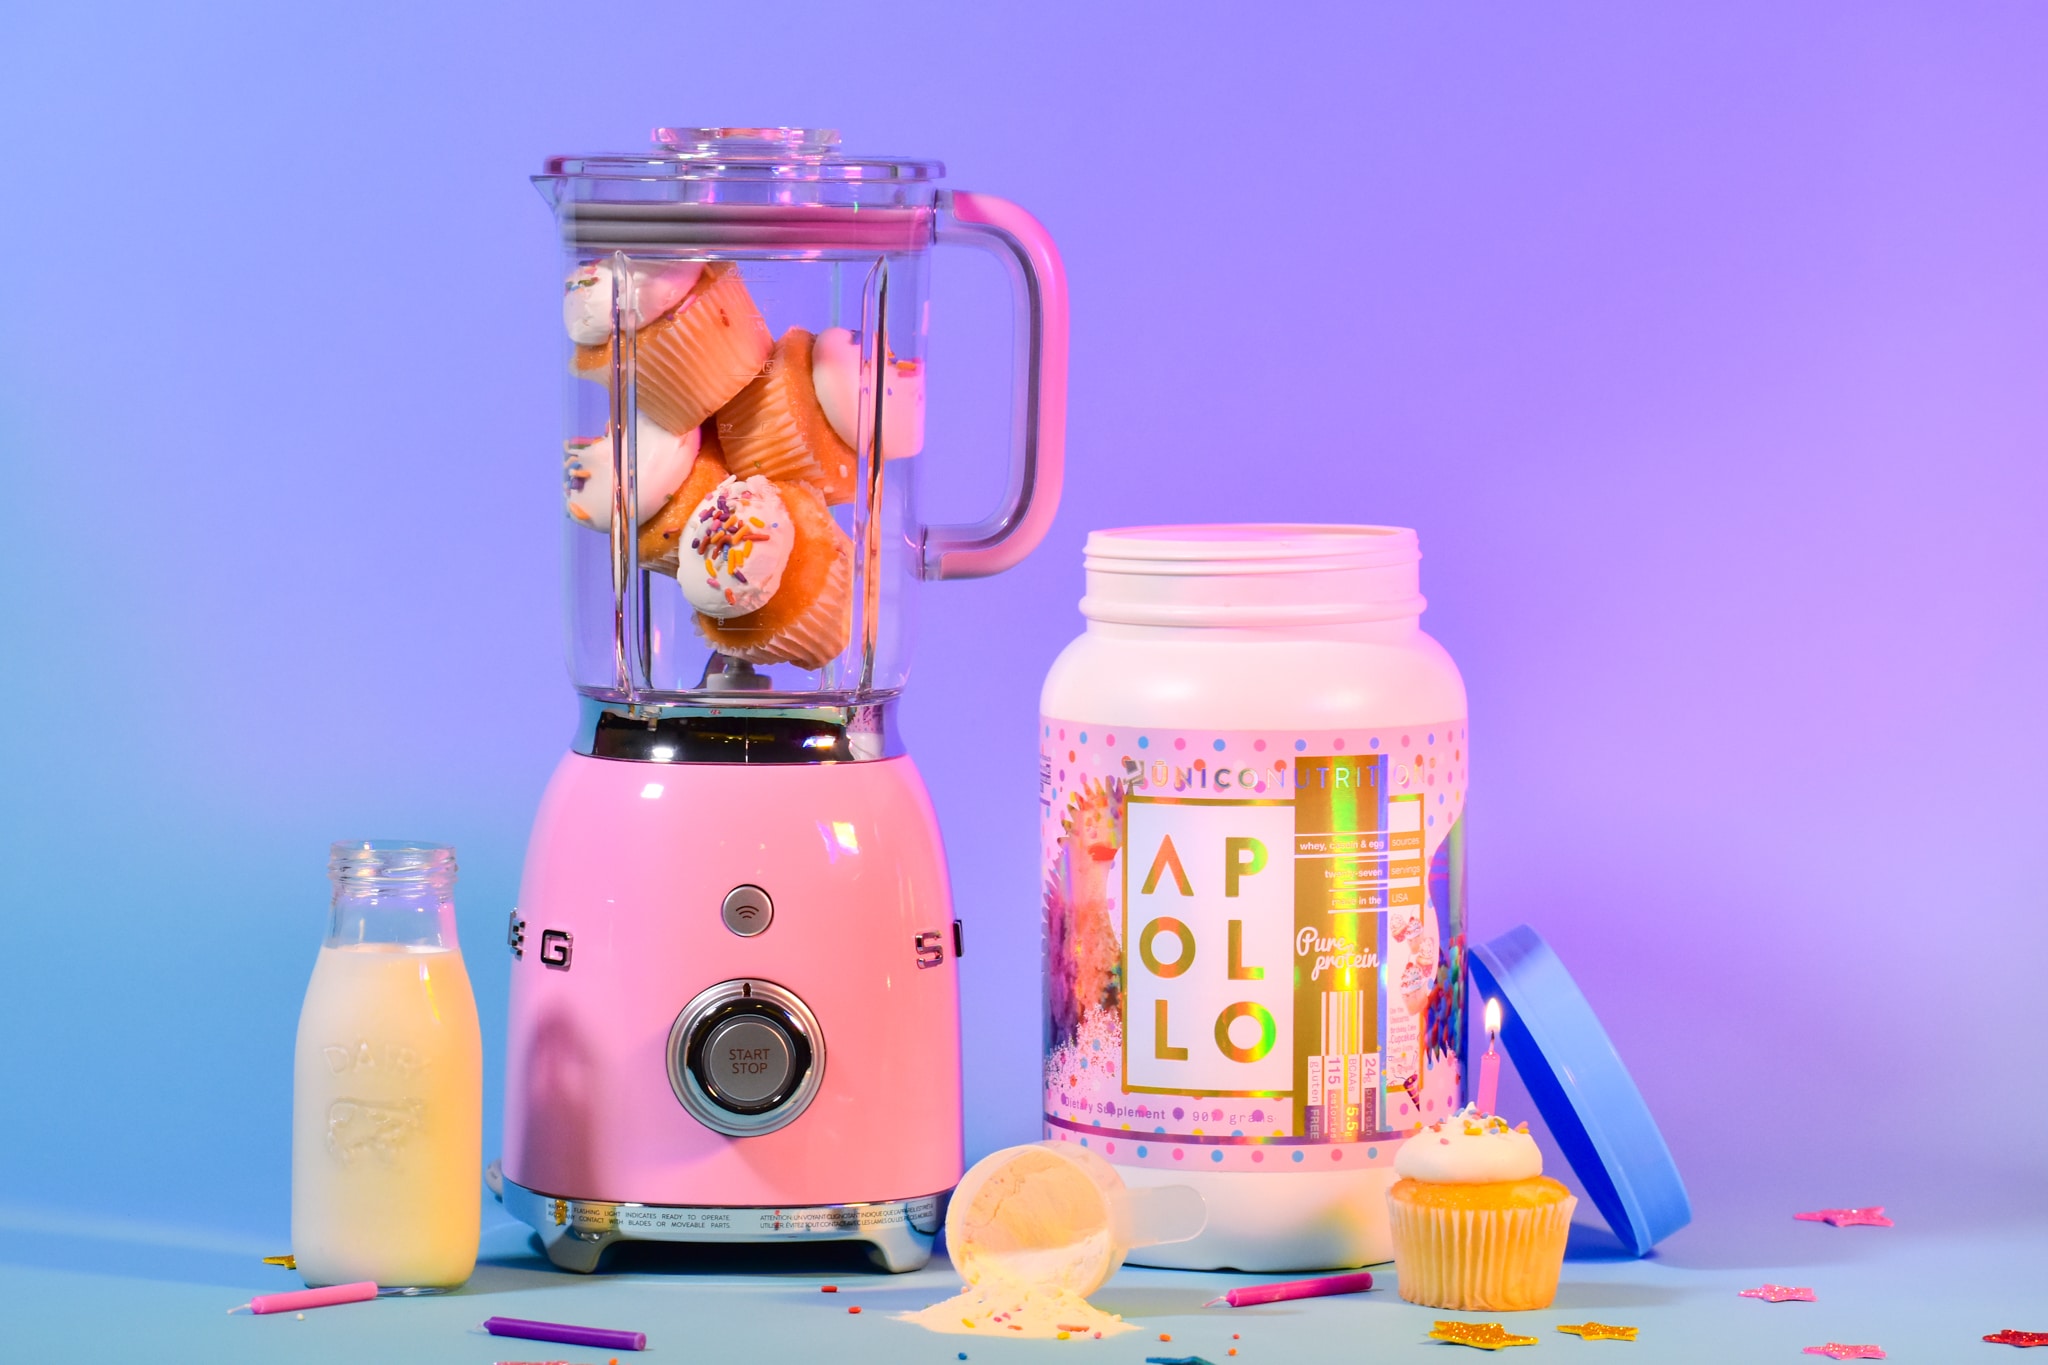 photo of a pink blender filled with birthday cake cupcakes, next to a jar of unico protein powder, with jar of milk and colorful blue and purple background.